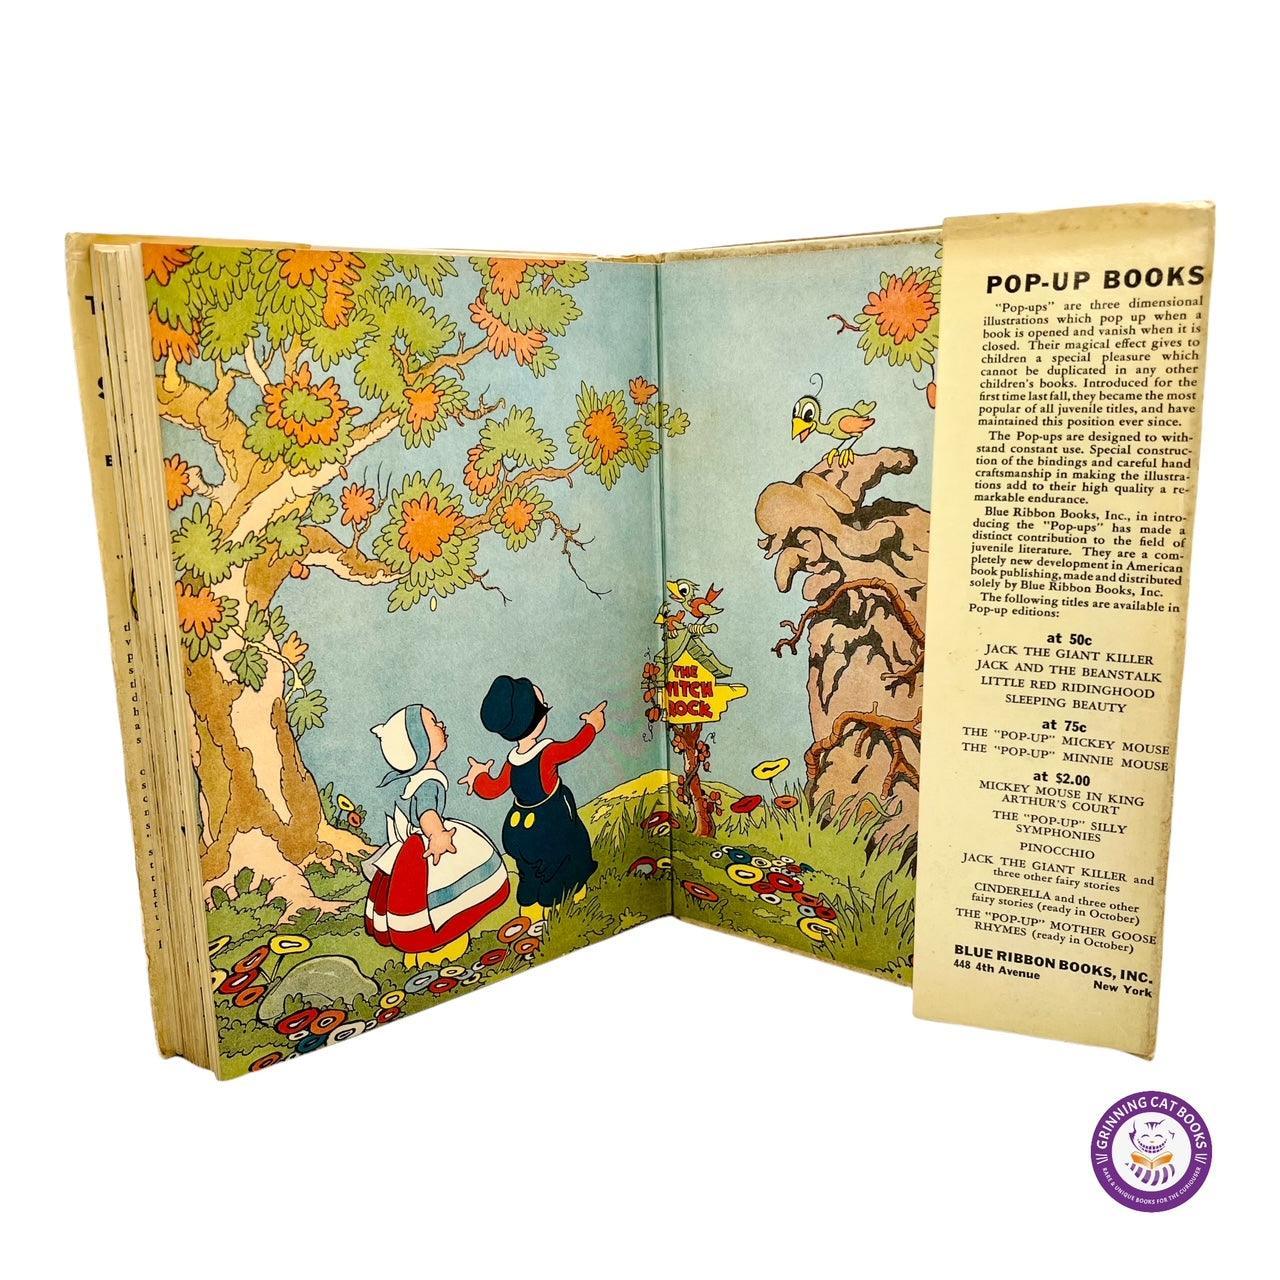 Mickey Mouse Presents his Silly Symphonies: Babes in the Woods & King Neptune (with Pop-up Illustrations) - Grinning Cat Books - CHILDREN'S LITERATURE - DISNEY, POPUP